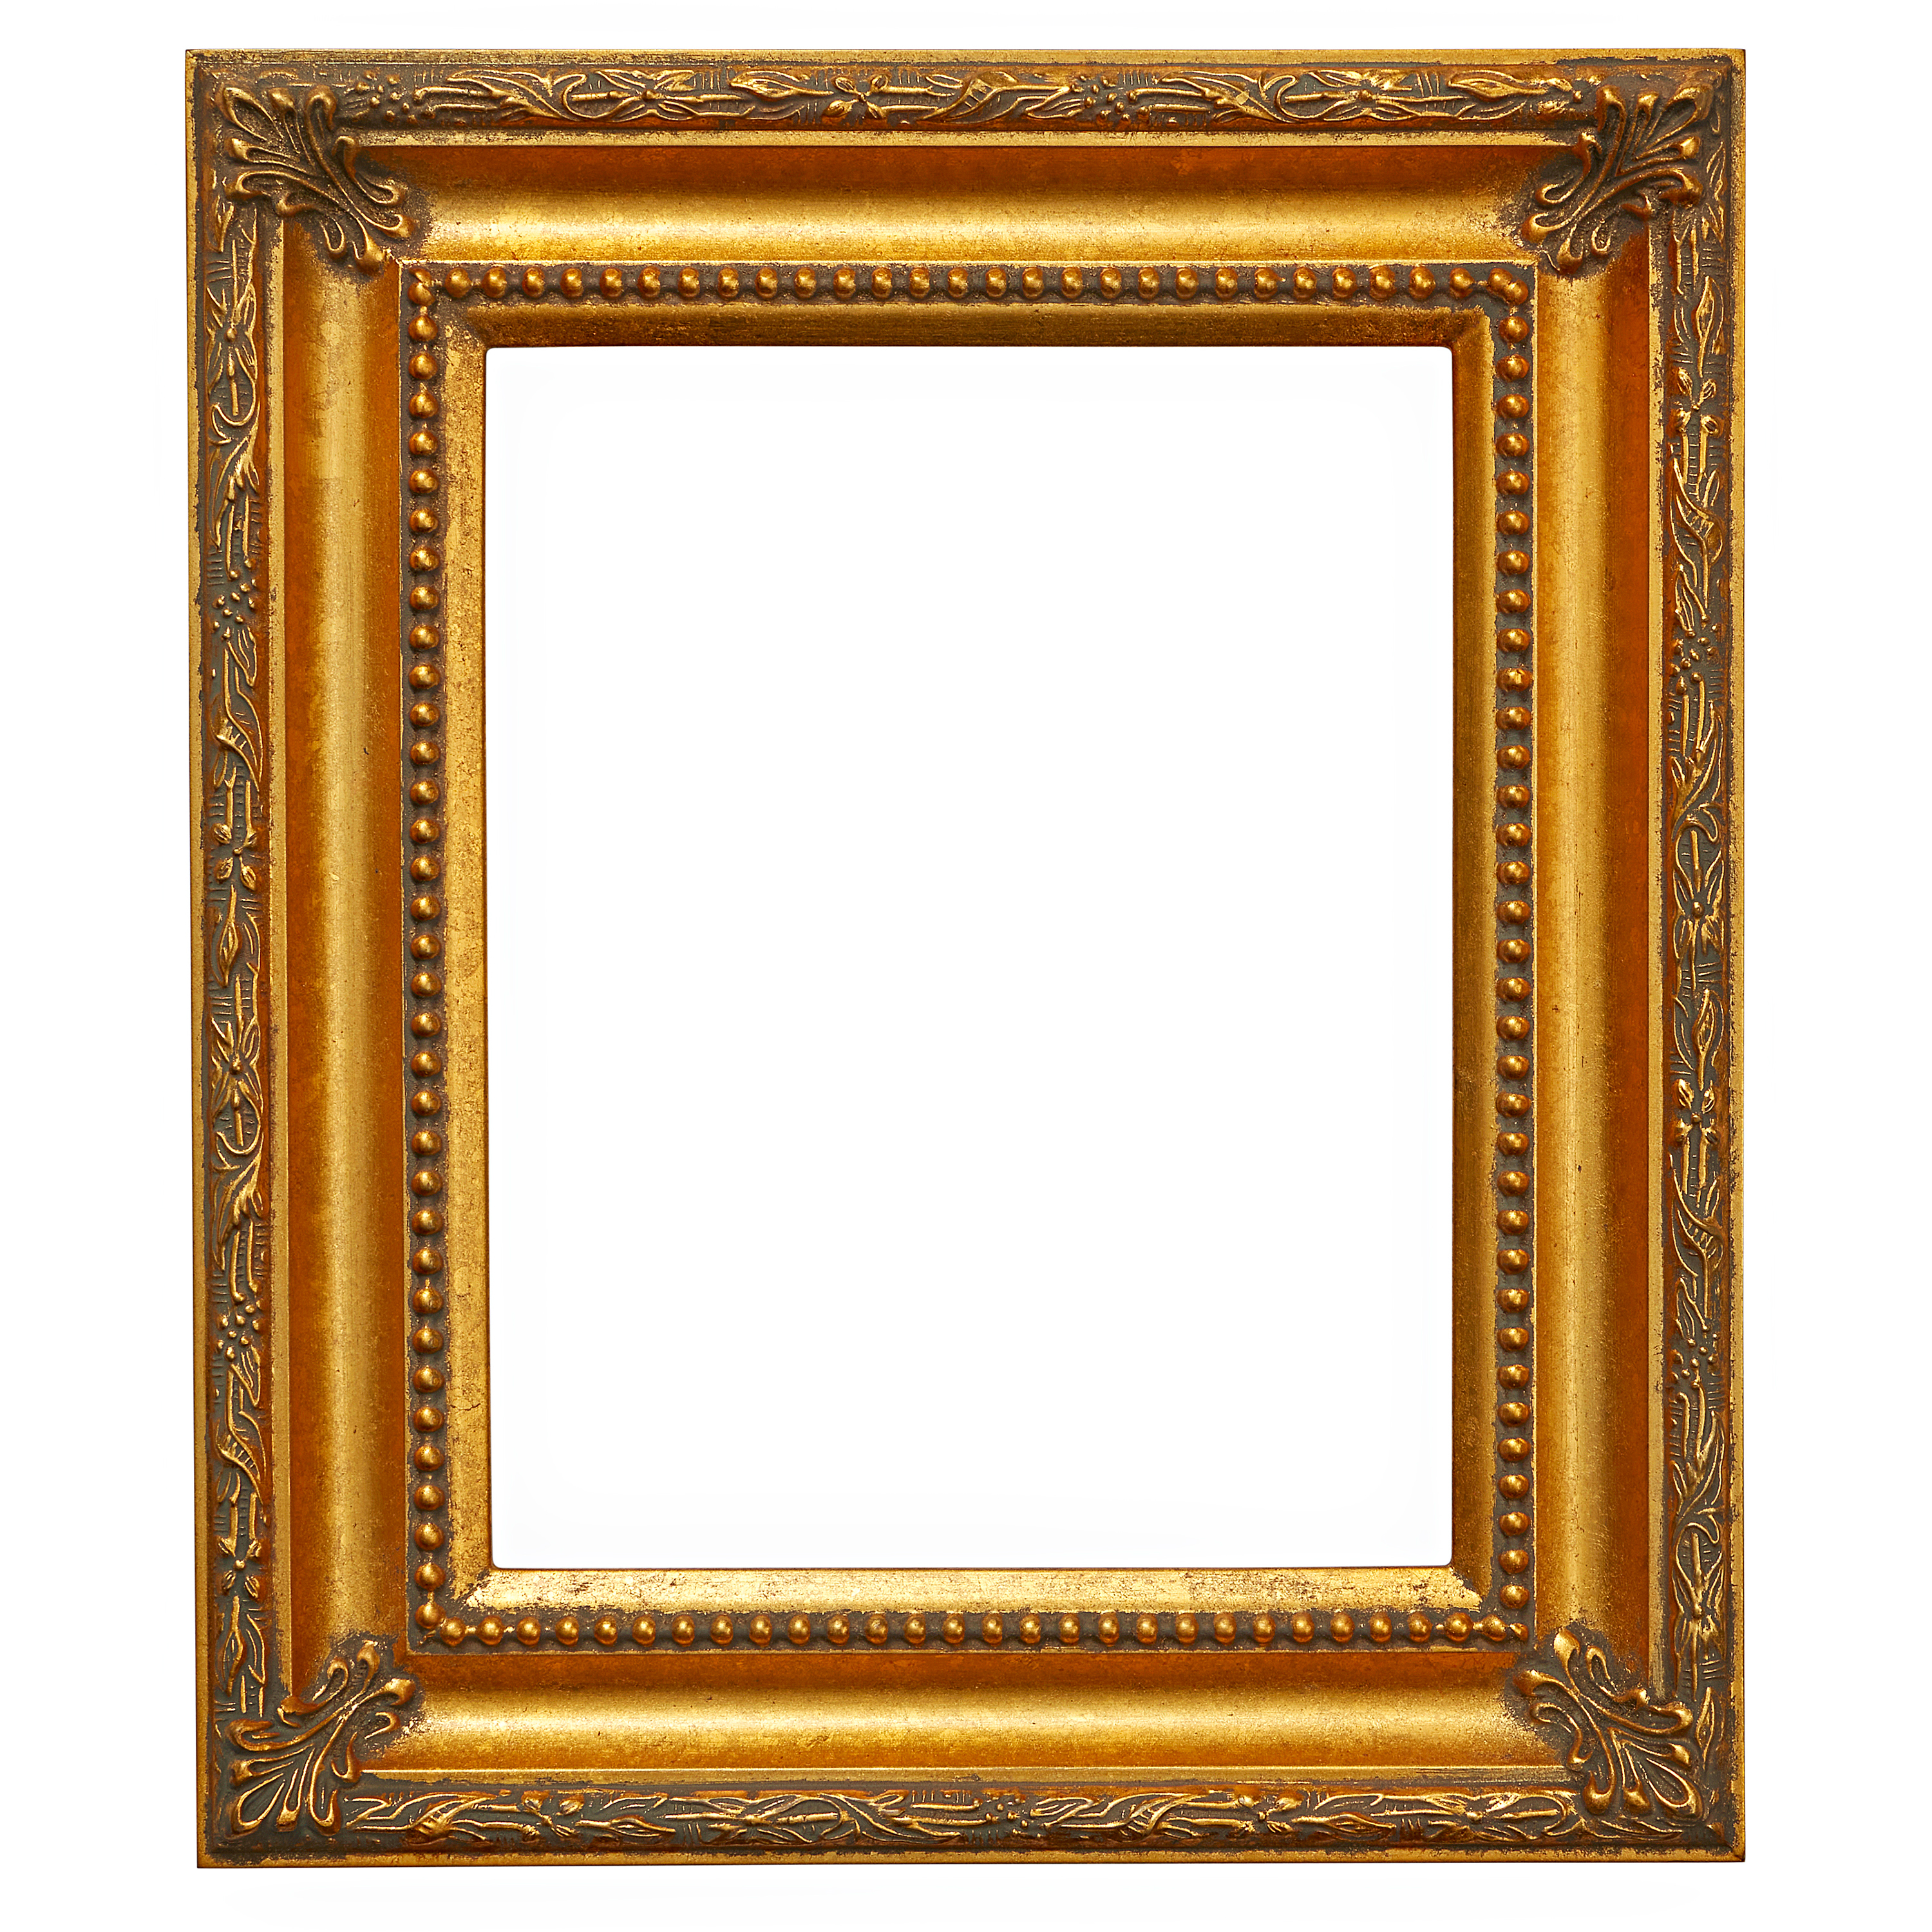 8x10 Baroque Style Photo Frame Art Ornate Wall Frame Canvas 